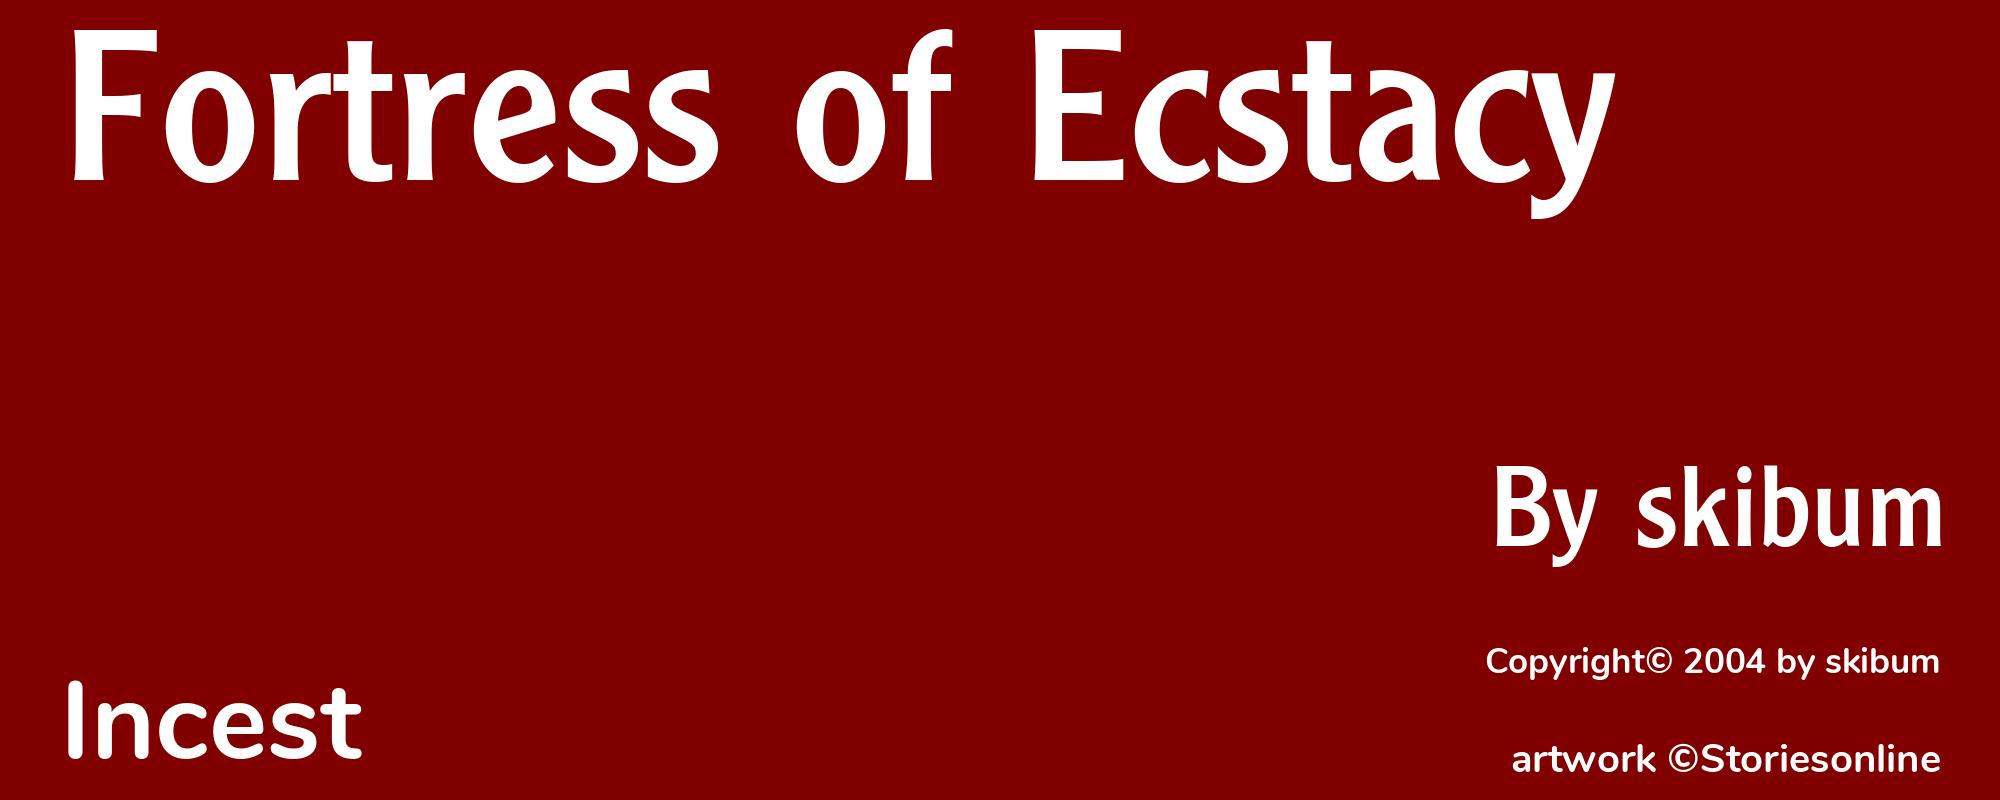 Fortress of Ecstacy - Cover